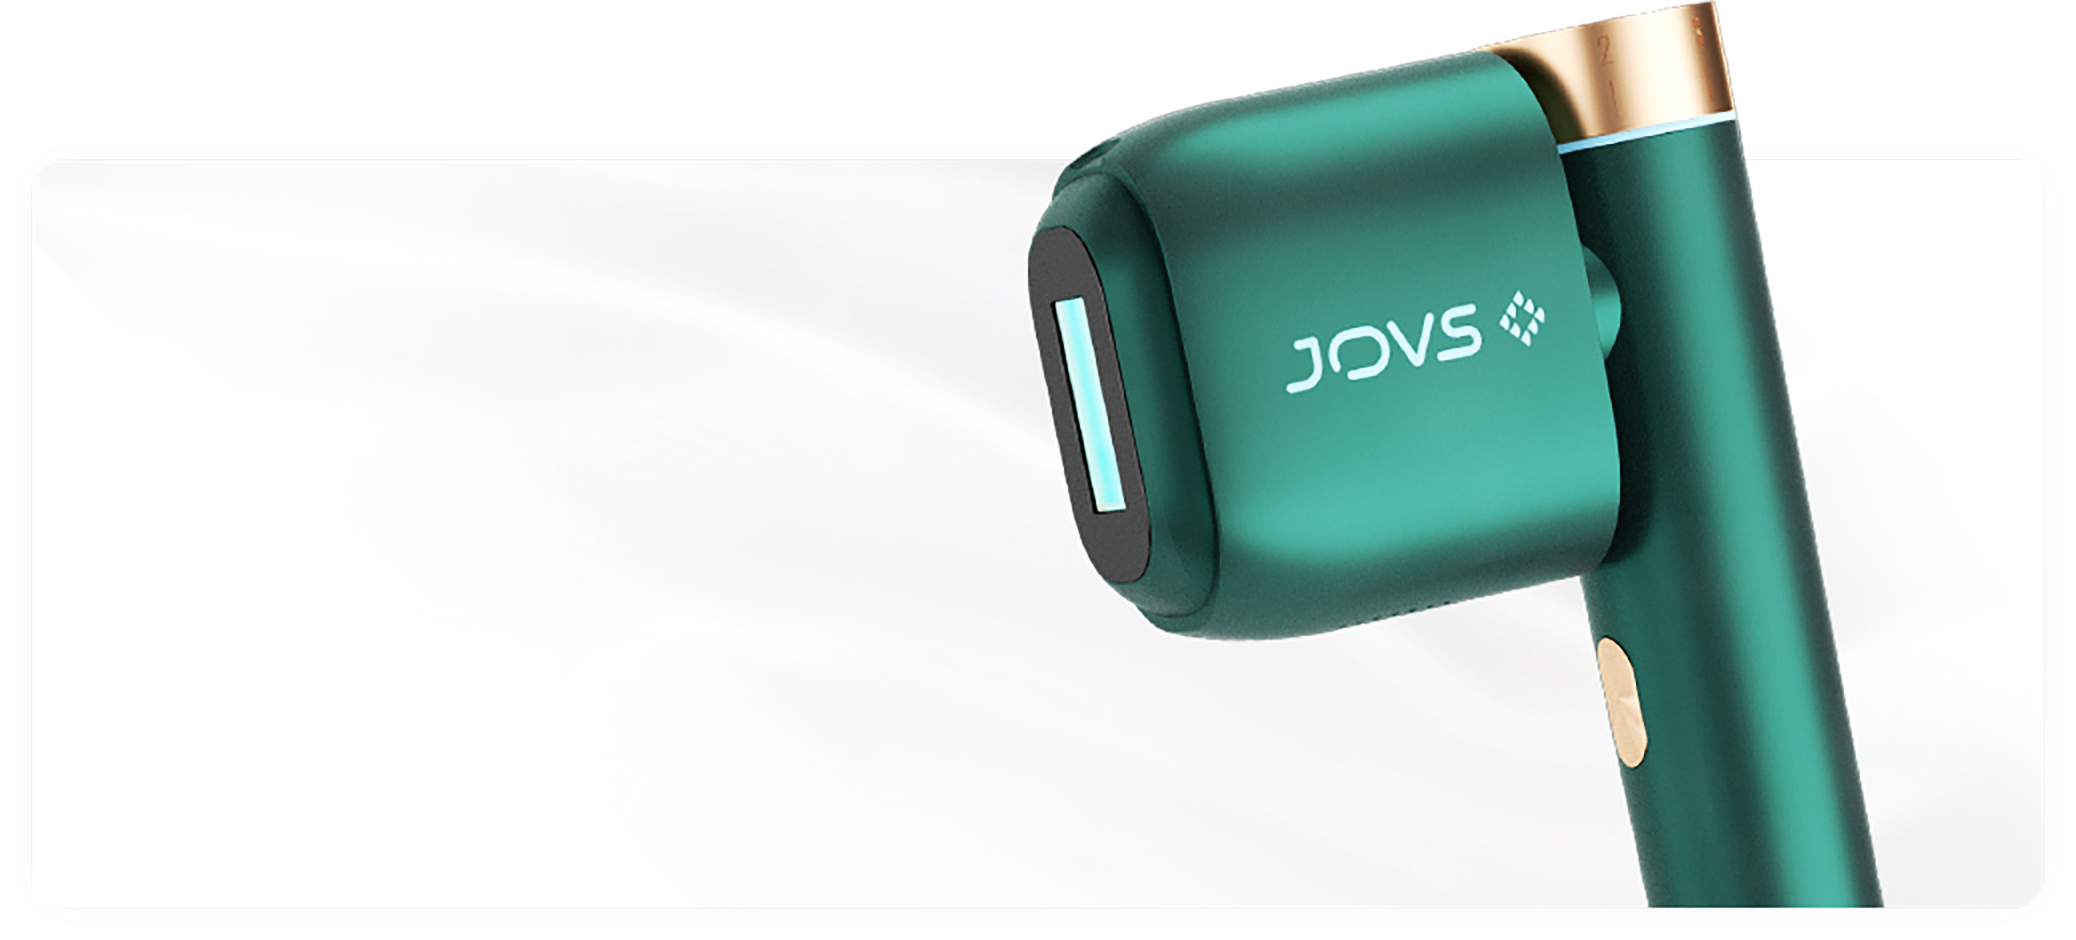 Sleek JOVS Venus Pro IPL Hair Removal Handset in Emerald Green with Gold Accents for Efficient At-Home Hair Reduction